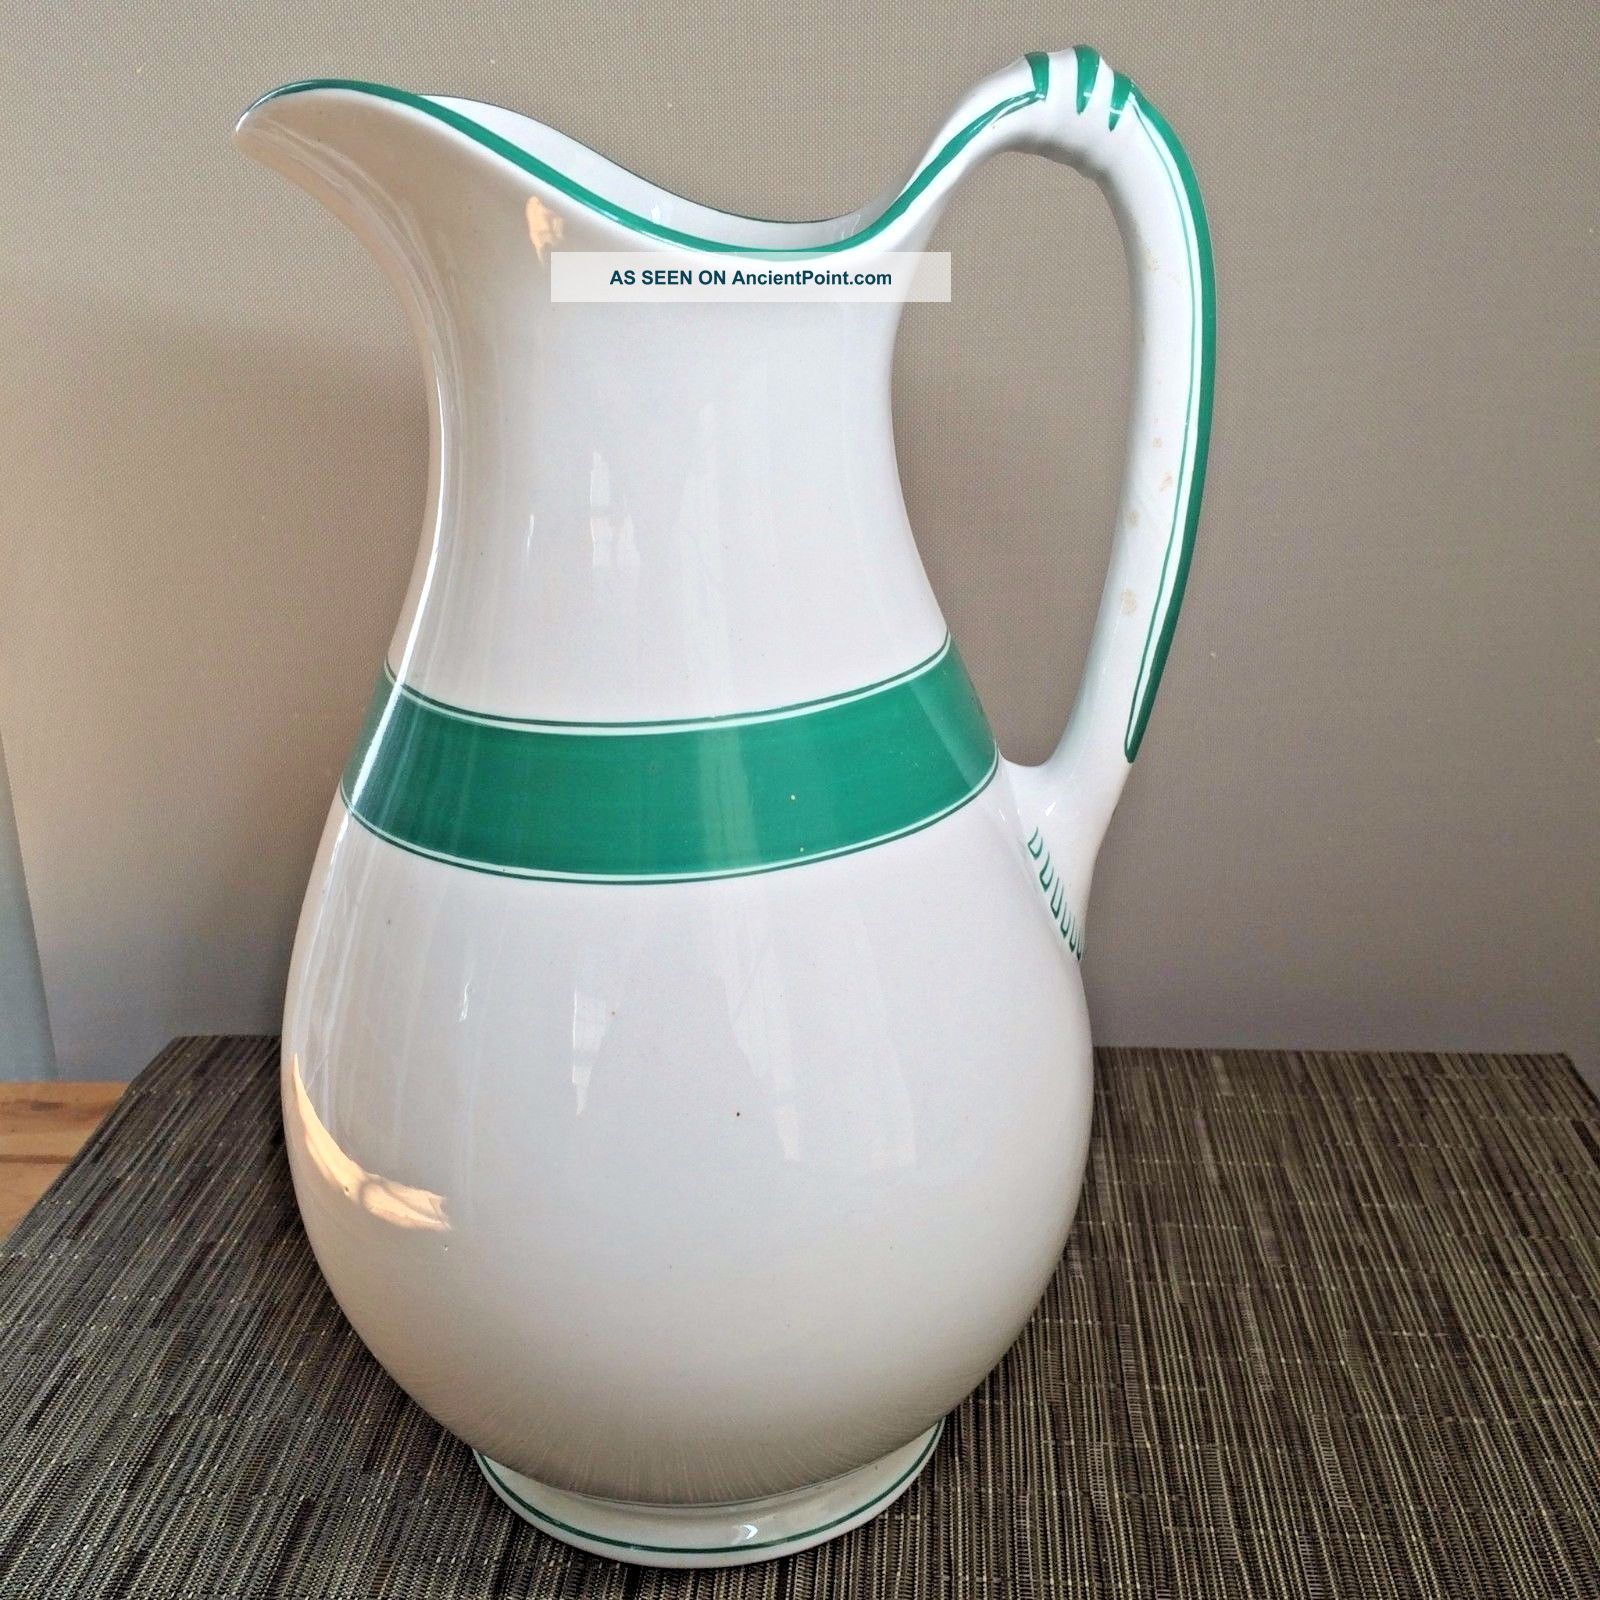 Gorgeous Elsmore & Forster Large White Ironstone Pitcher C.  1850 - 70 Pitchers photo